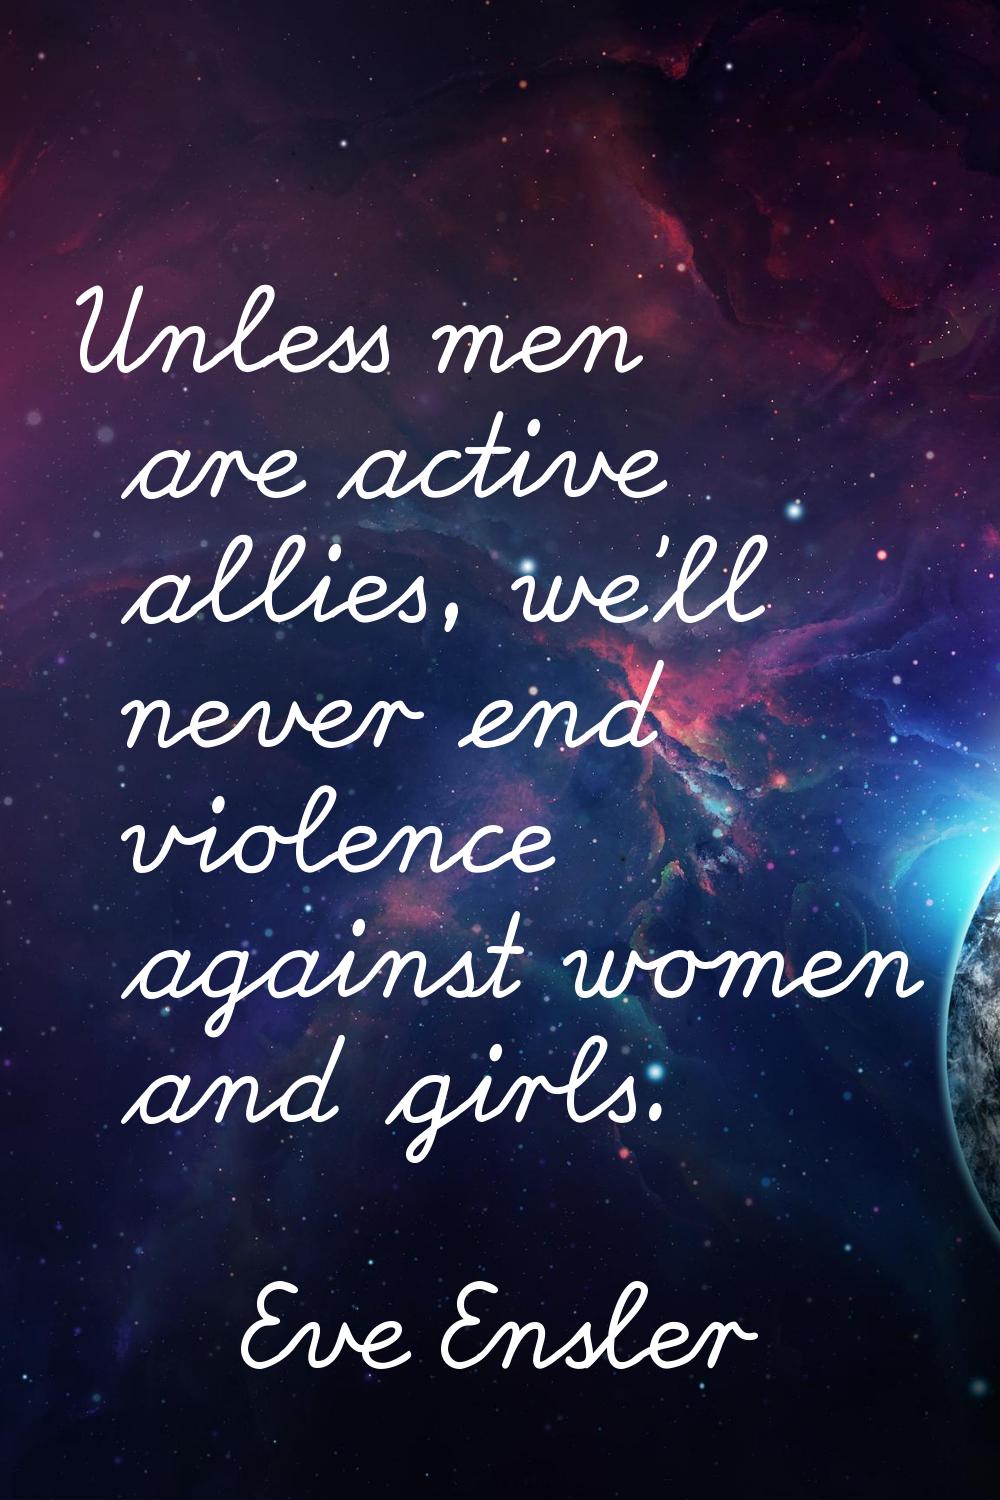 Unless men are active allies, we'll never end violence against women and girls.